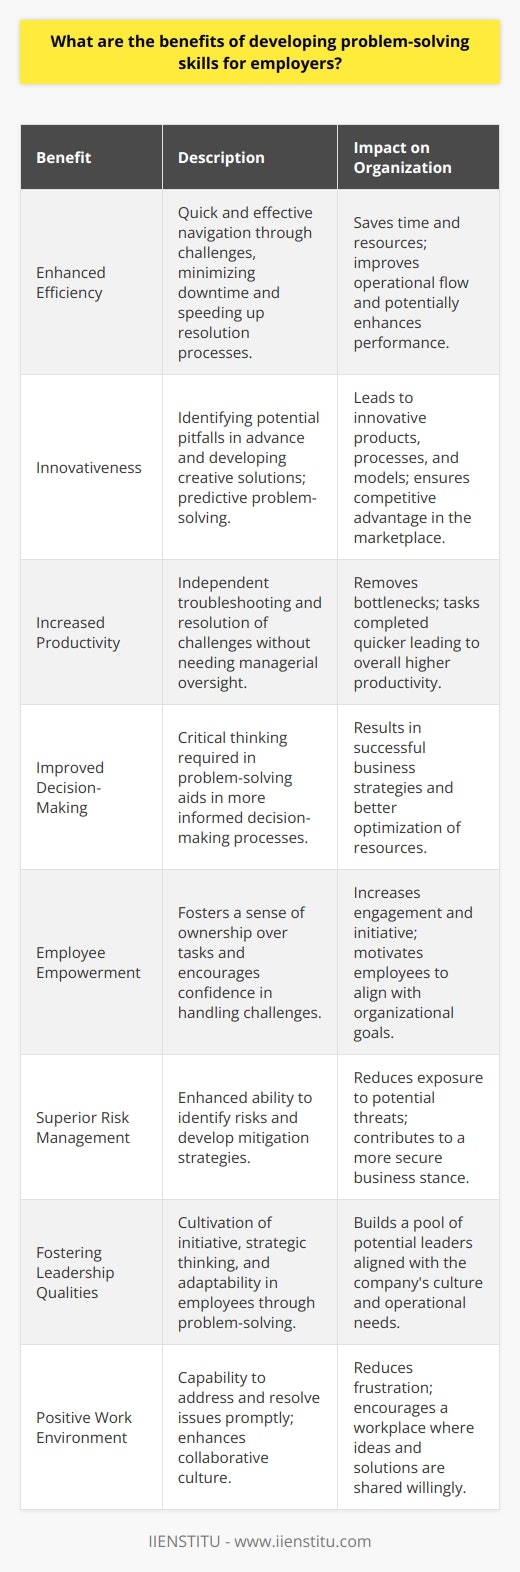 Employers across industries often grapple with a plethora of challenges ranging from operational bottlenecks to strategic planning hurdles. In this context, developing problem-solving skills among employees emerges as a pivotal asset for any organization looking to streamline efficiency and foster innovation. Here’s how nurturing these skills can translate into substantial benefits for employers:1. Enhanced Efficiency: Employees equipped with adept problem-solving skills can navigate through challenges more swiftly and effectively. This minimizes downtime and speeds up the resolution process, allowing the company to maintain or even improve its operational flow. As a result, businesses can save on the time and resources that might have been spent on lengthy problem-solving cycles.2. Innovativeness: Problem-solving is not solely about addressing existing issues; it also includes a predictive ability to anticipate potential pitfalls and devise creative solutions. This proactive approach to problem-solving can lead to the development of innovative products, processes, and business models, helping an organization to differentiate itself in the marketplace and stay ahead of competitors.3. Increased Productivity: Employees that can independently troubleshoot and resolve challenges without constant direction contribute to higher overall productivity. They circumvent the bottleneck of tasks awaiting managerial input and proceed confidently with their responsibilities, thereby enhancing the pace at which projects are completed.4. Improved Decision-Making: The process of solving problems typically requires a level of critical thinking that contributes to better decision-making skills. A workforce that can analyze situations, weigh options, and foresee outcomes will make more informed decisions, which in turn can lead to more successful business strategies and resource optimization.5. Employee Empowerment: Encouraging problem-solving skills among employees empowers them to take ownership of their tasks and challenges. Empowered employees are more engaged, show greater initiative, and are often more motivated to contribute meaningfully to the organization's goals.6. Superior Risk Management: Armed with robust problem-solving abilities, employees can better identify risks and develop mitigation strategies. This reduces the overall exposure to potential threats and places the employer in a more secure business position.7. Fostering Leadership Qualities: Employees who excel in problem-solving often demonstrate qualities that are ideal for leadership roles, such as initiative, strategic thinking, and adaptability. This creates a pipeline of potential leaders who are already attuned to the company's culture and operational dynamics.8. Positive Work Environment: Finally, a workforce that is able to address and resolve issues as they arise contributes to a more positive work environment. Problem-solving reduces the frustration that often comes with encountering barriers, and it also encourages a culture of collaboration, as employees feel more comfortable sharing ideas and solutions.In light of these benefits, it is crucial for employers to invest in training and development programs that sharpen the problem-solving skills of their workforce. IIENSTITU, for example, offers tailored courses that can help individuals refine these skills to meet their employer's operational and strategic demands effectively.Ultimately, employers that recognize and cultivate problem-solving acumen within their workforce are better positioned to navigate an ever-changing business landscape, sustain continuous improvement, and drive organizational success.